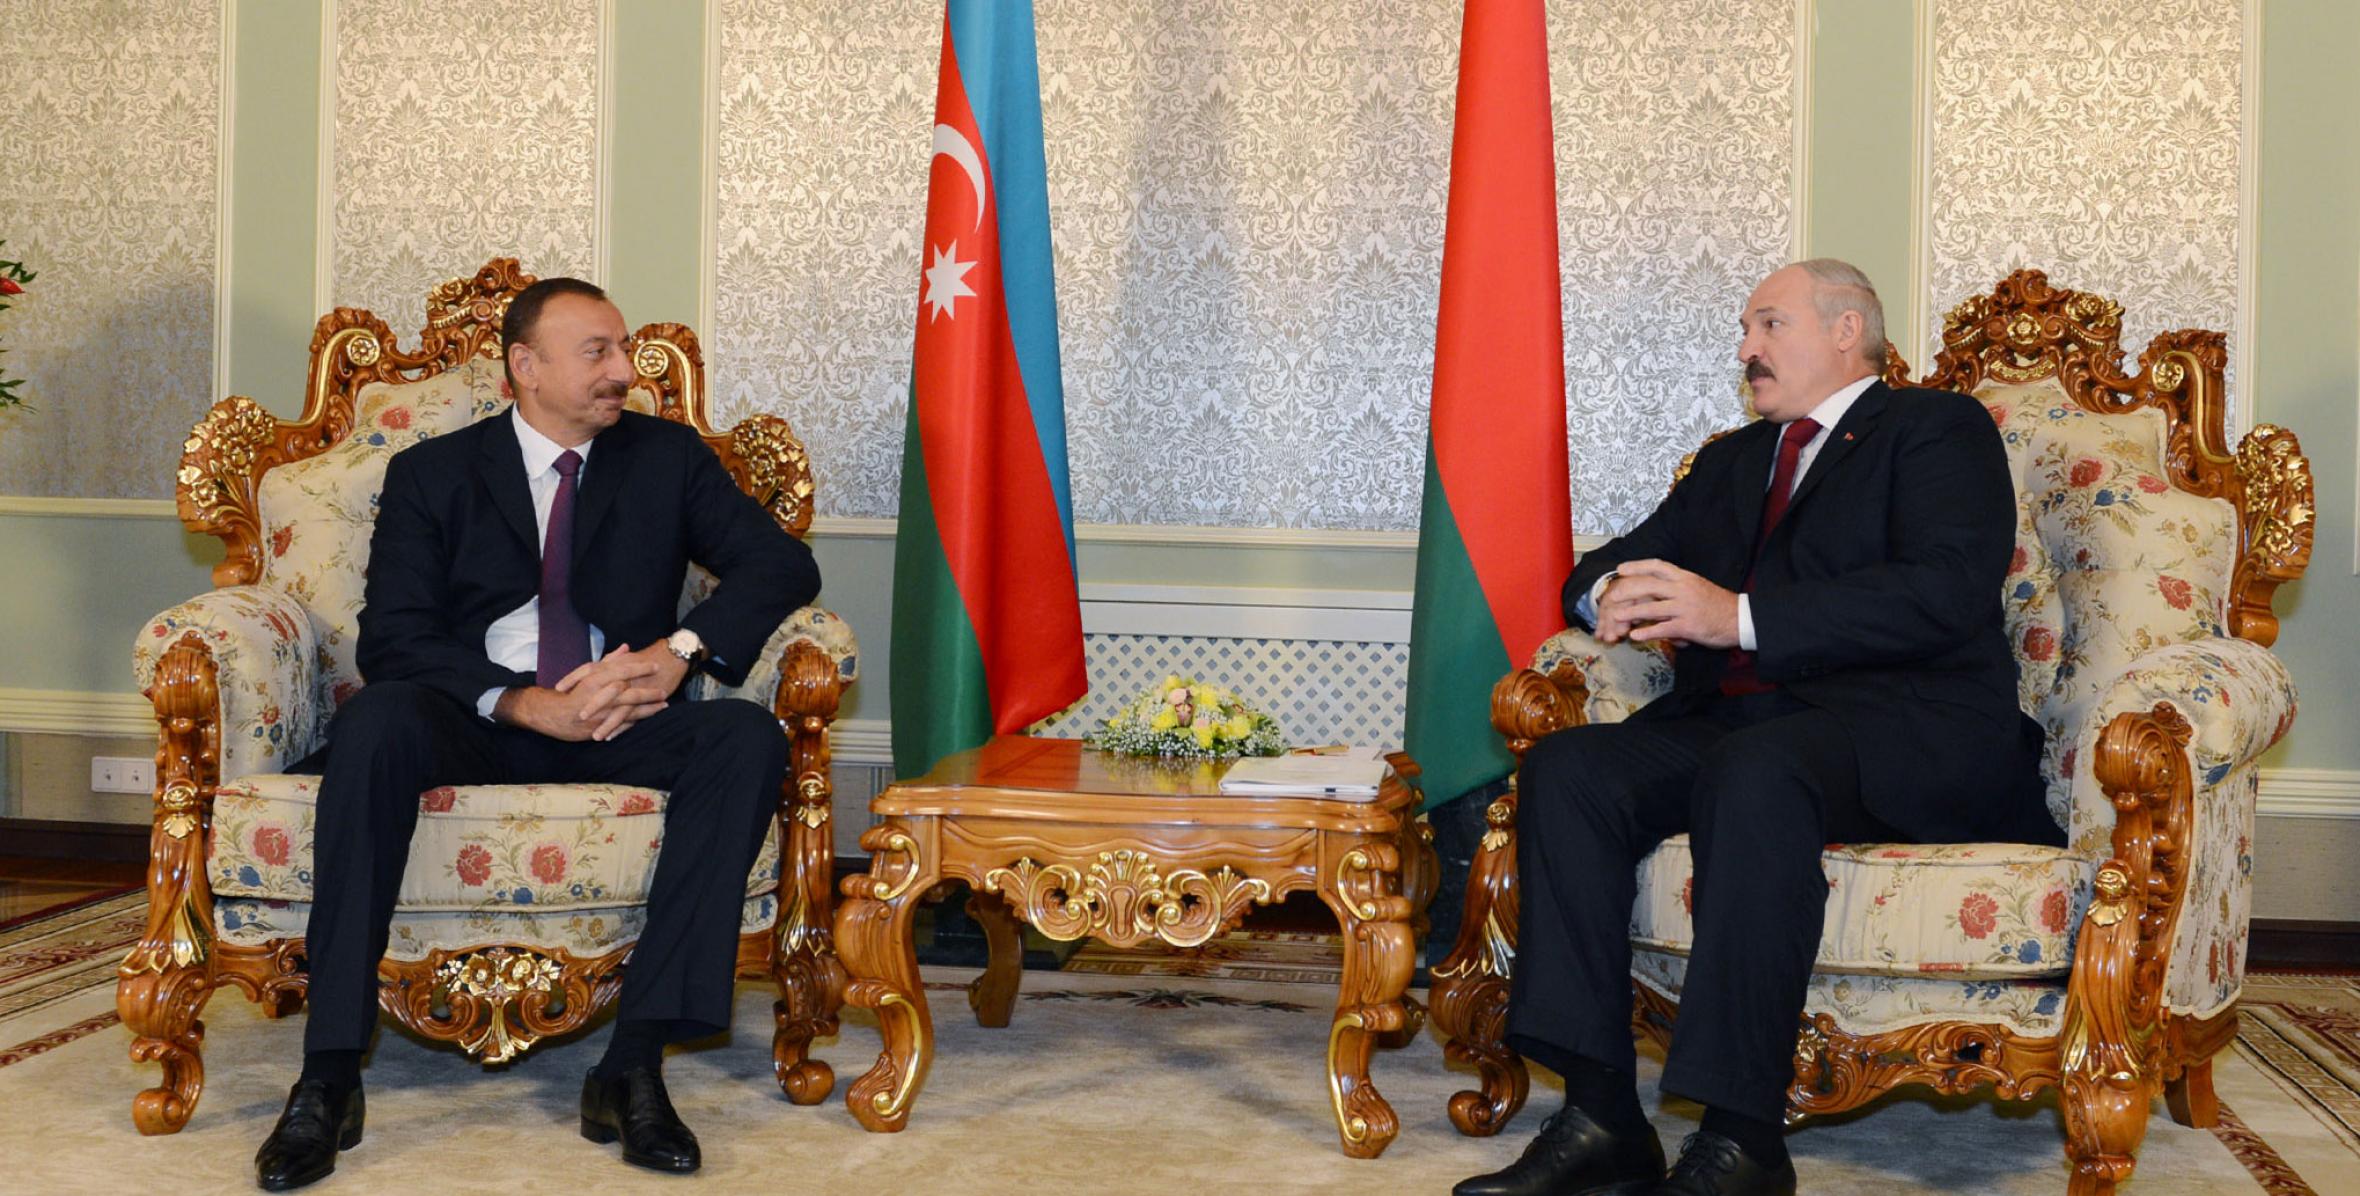 Ilham Aliyev and President of Belarus Alexander Lukashenko had a face-to-face meeting